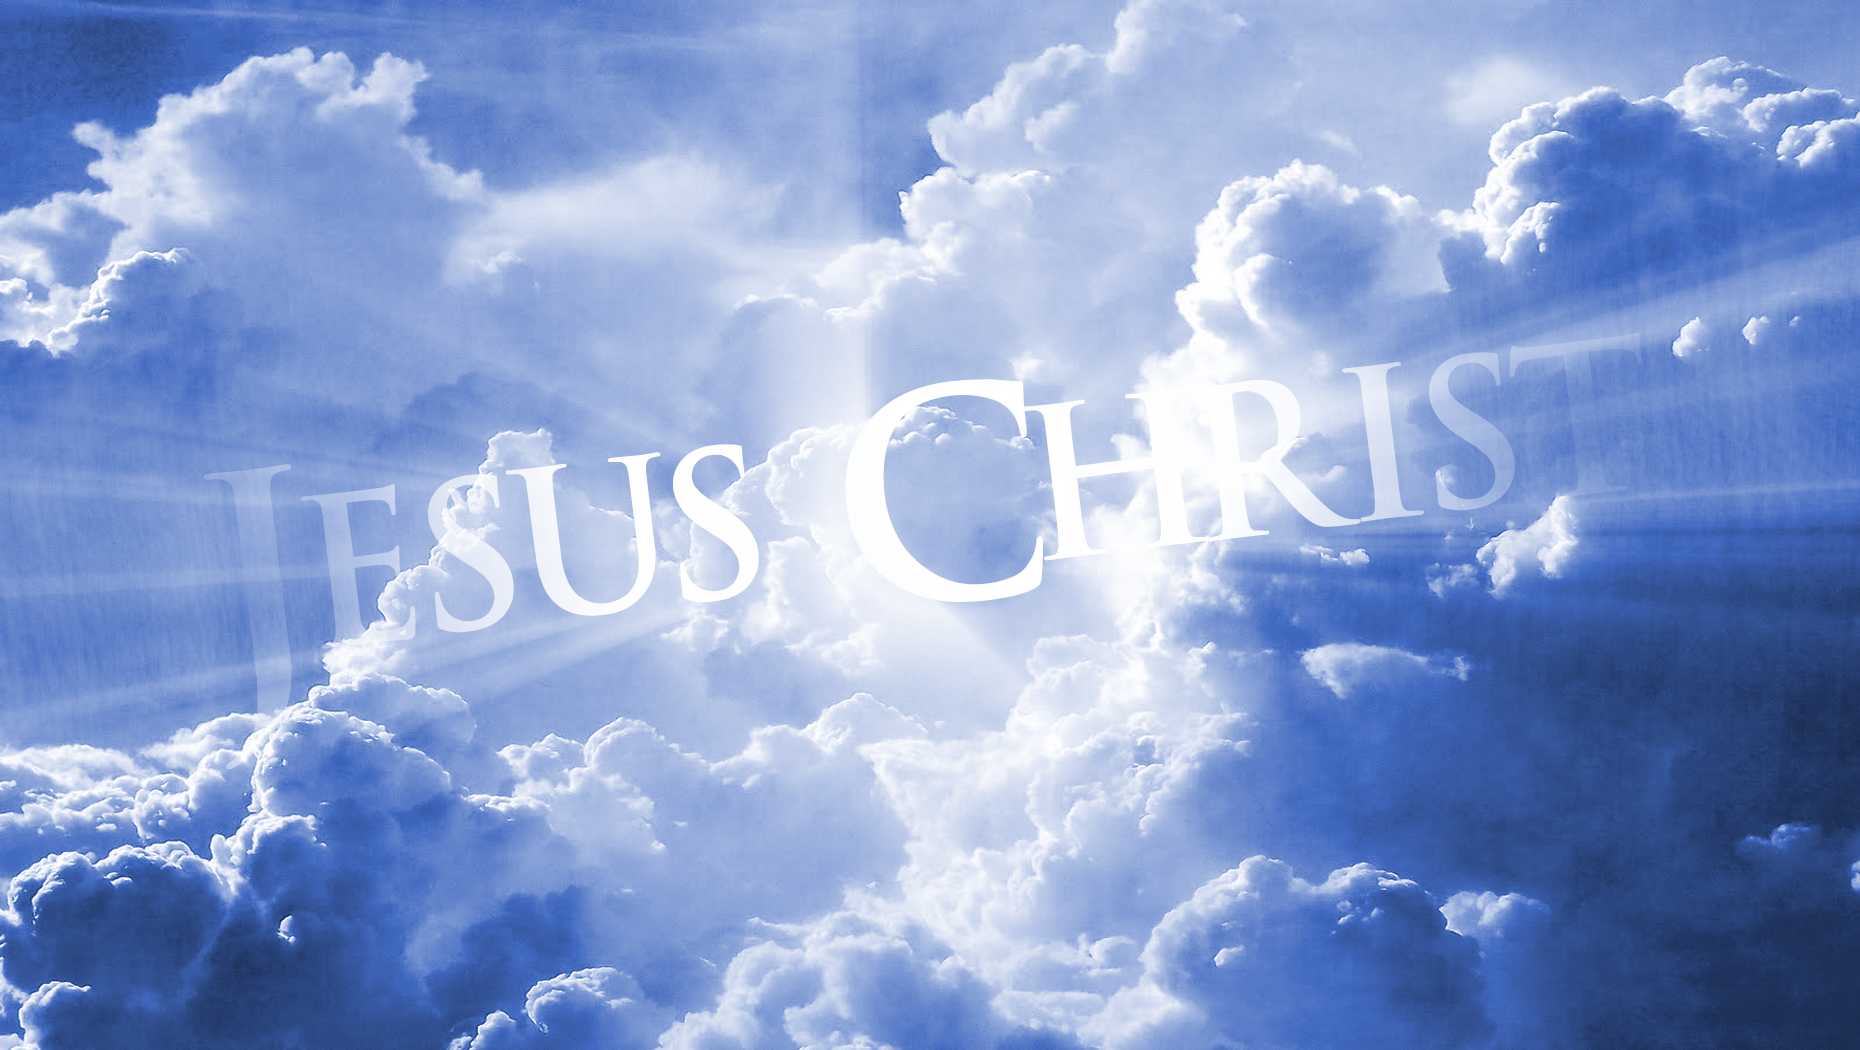 Jesus Christ Widescreen Wallpaper Pictures To